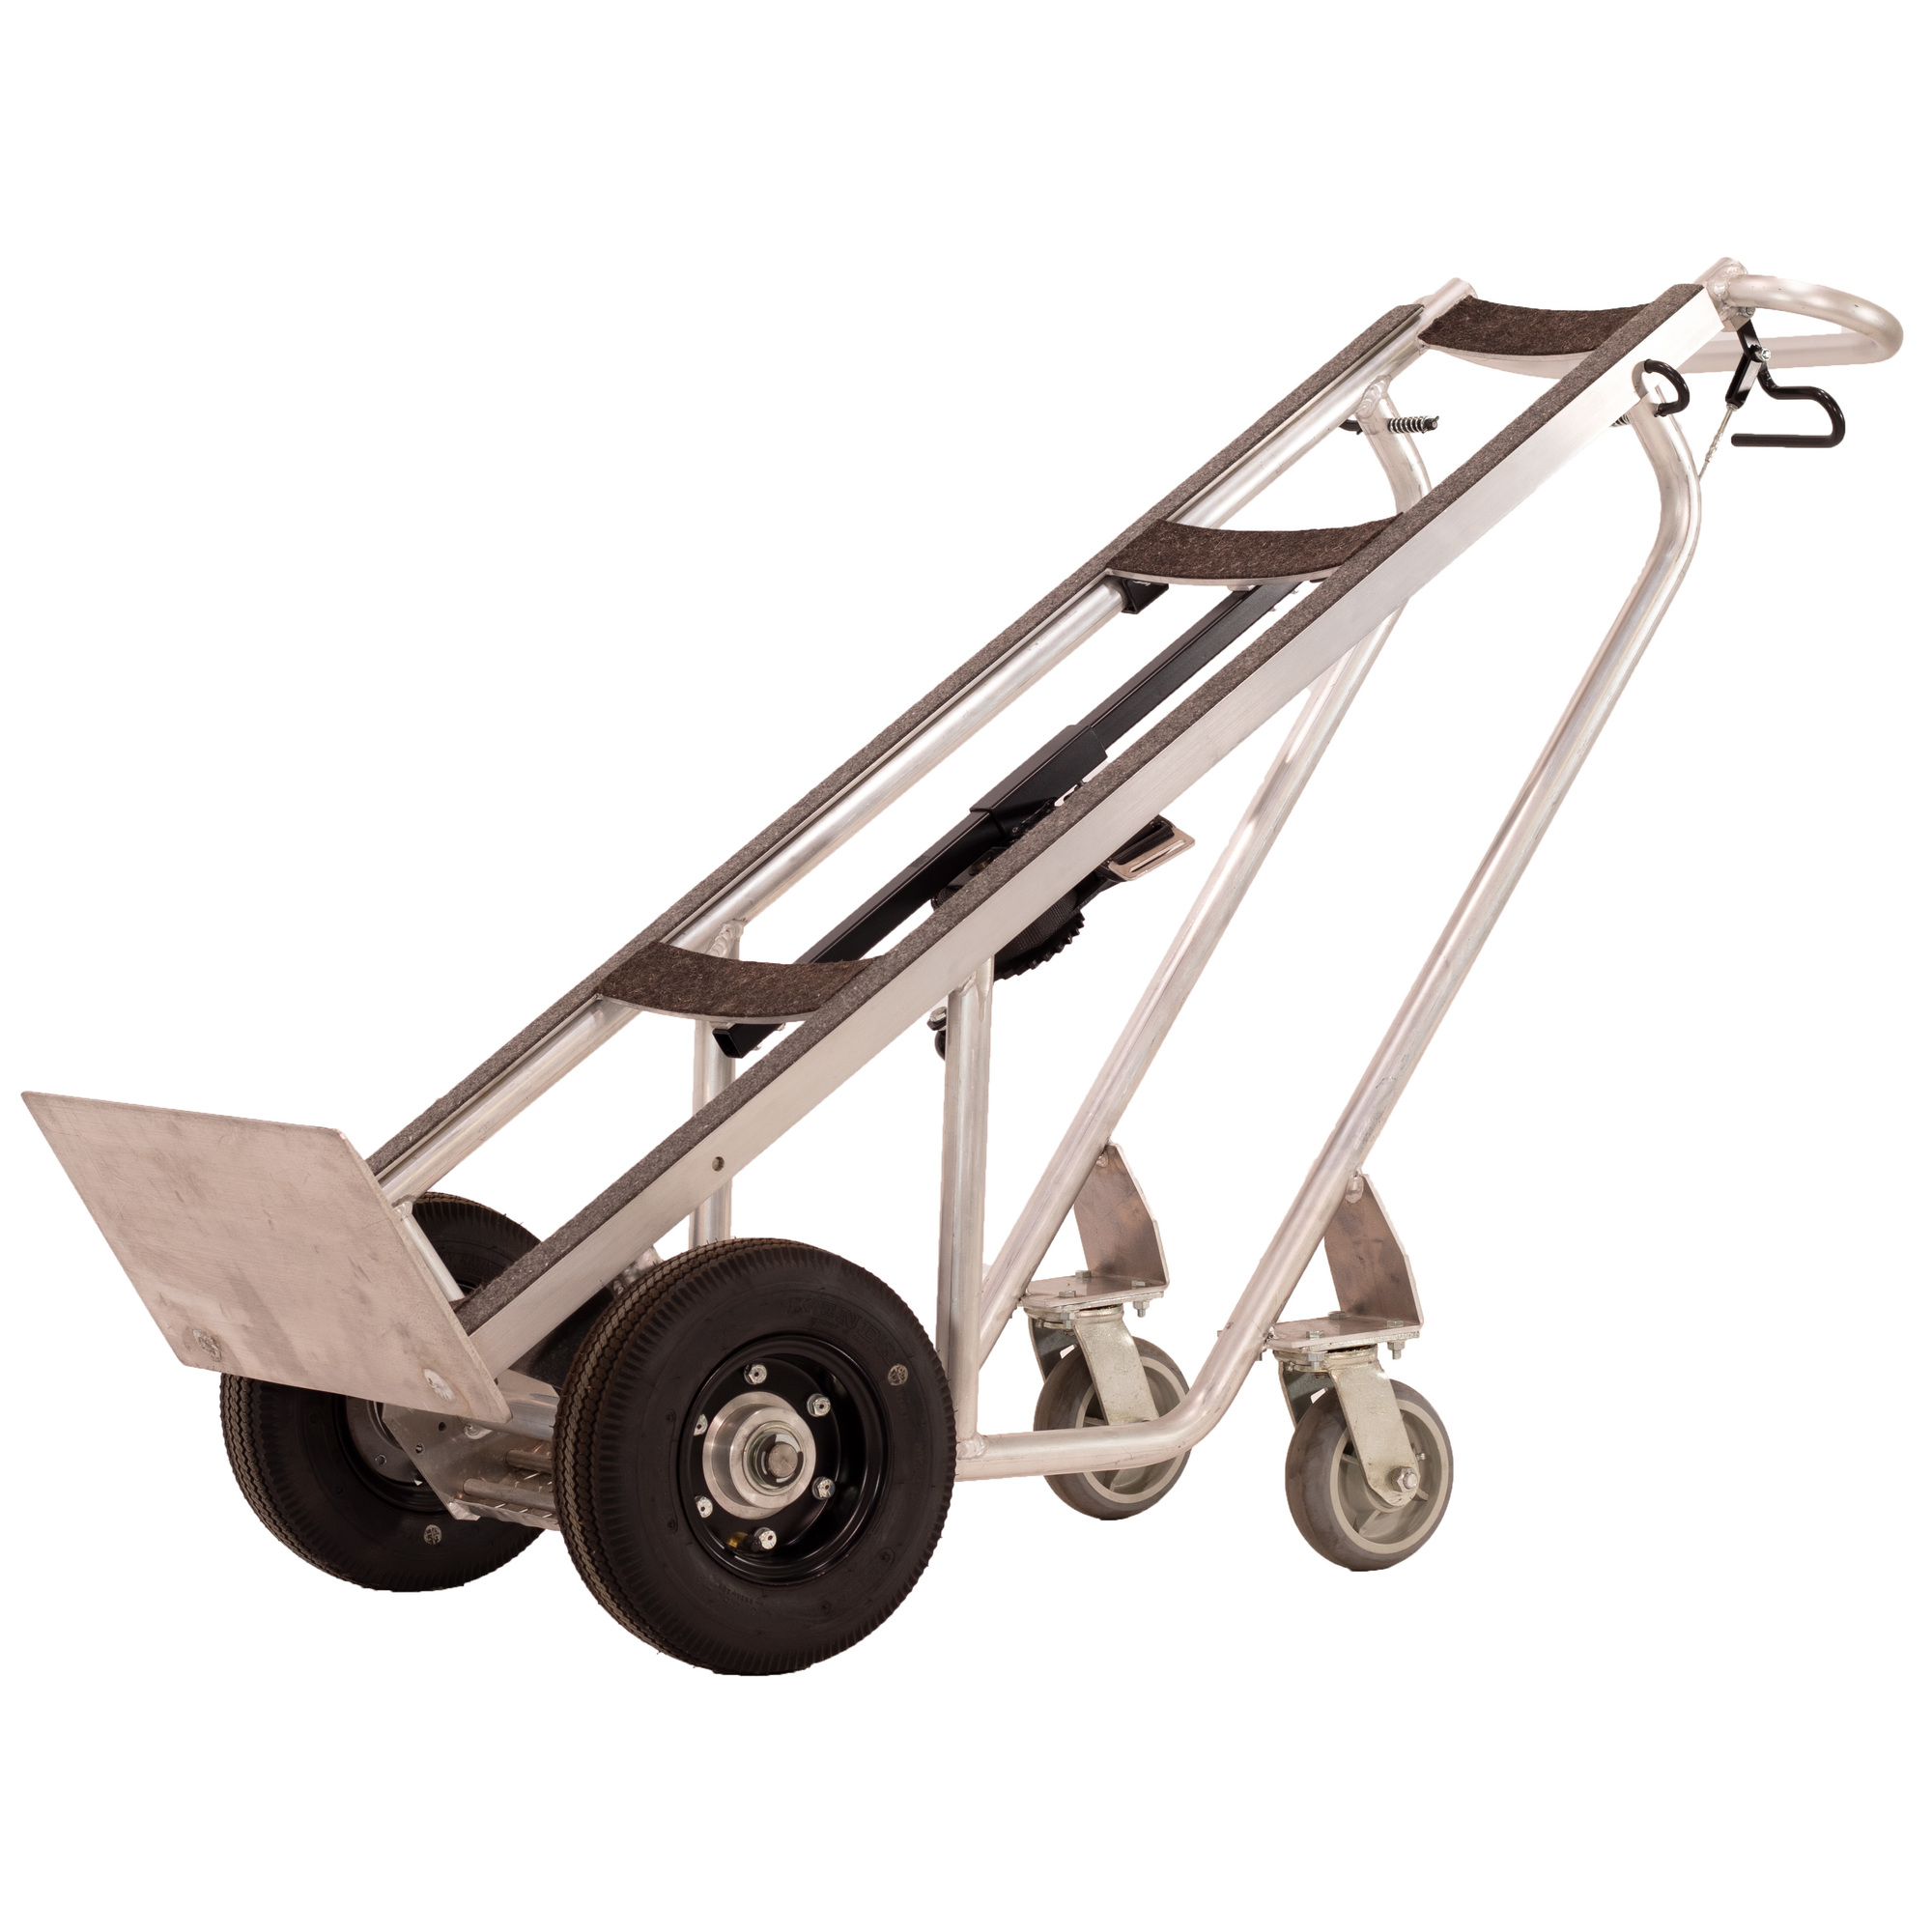 Valley Craft, Deluxe Commercial Hand Truck, Spring Loaded Frame, Load Capacity 1000 lb, Height 62 in, Material Aluminum, Model F89206